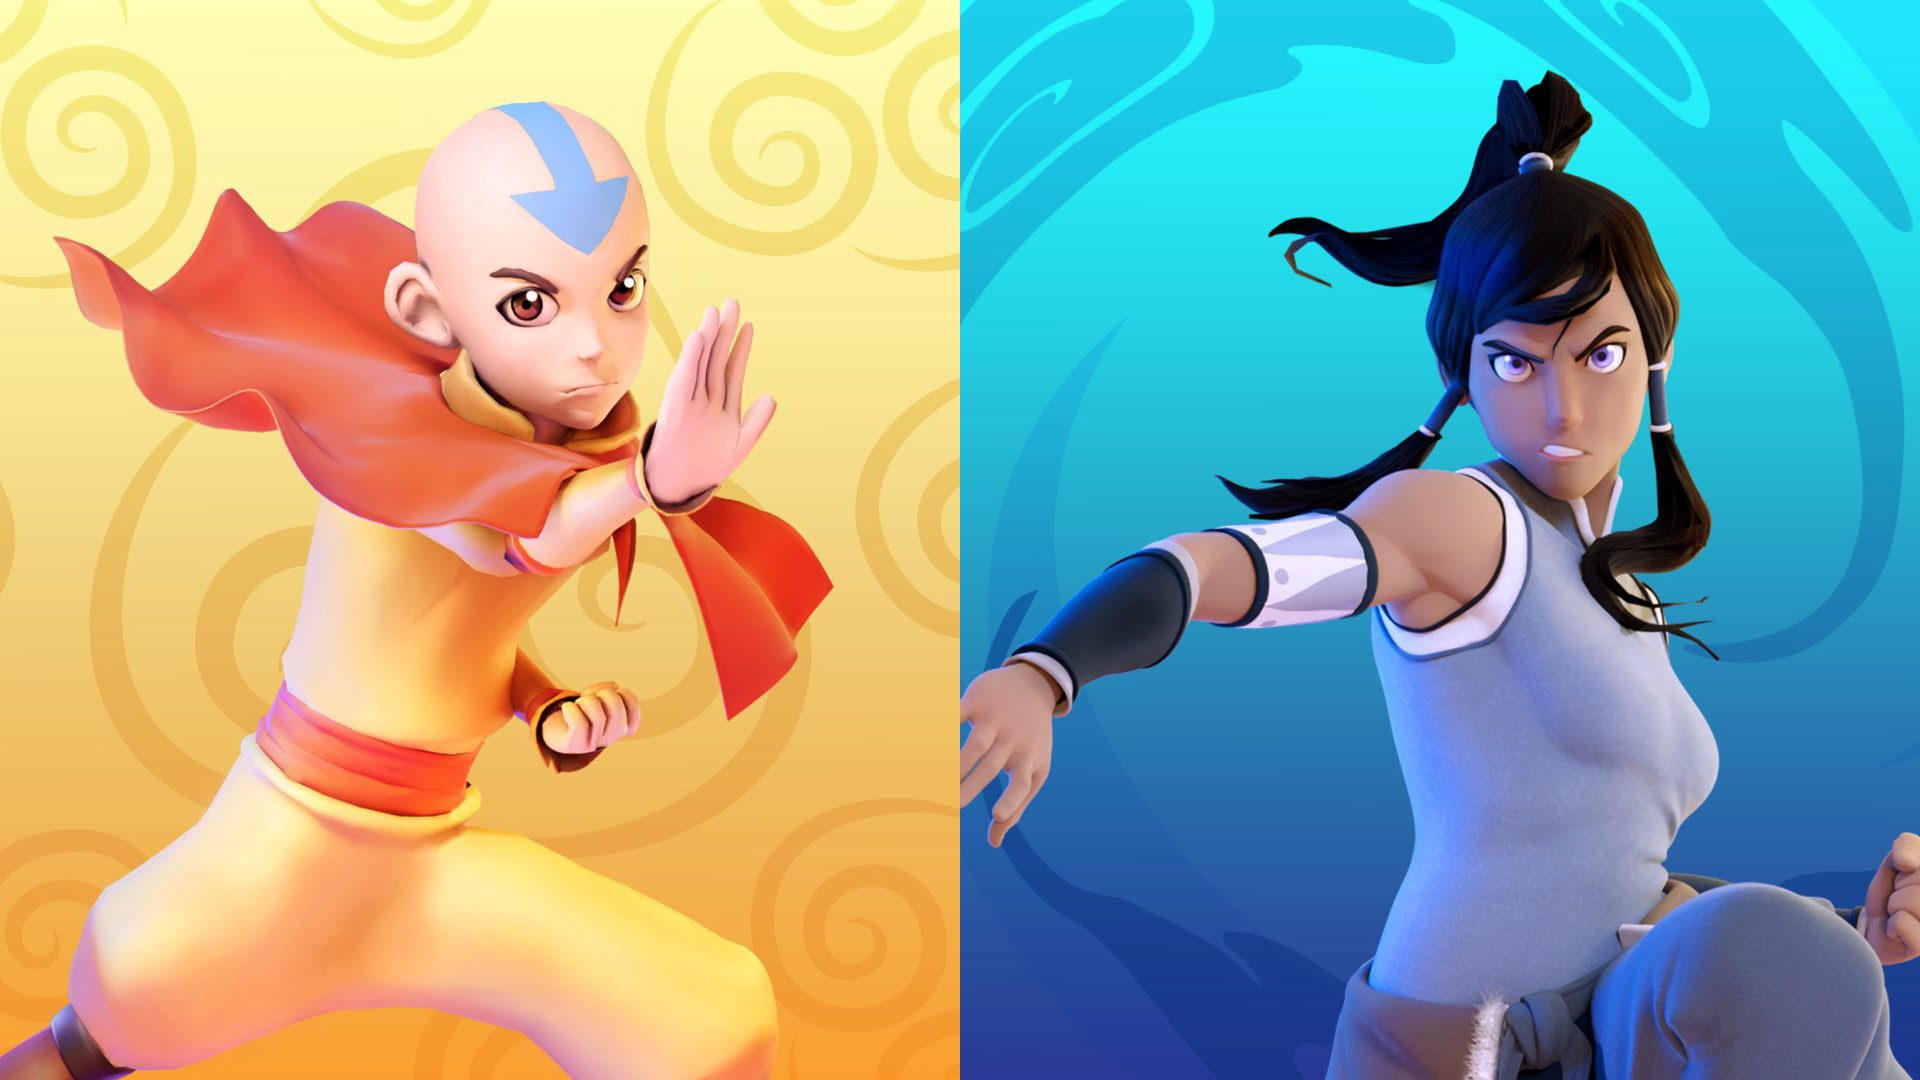 Avatars Aang and Korra confirmed for Nickelodeon All-Star Brawl thumbnail